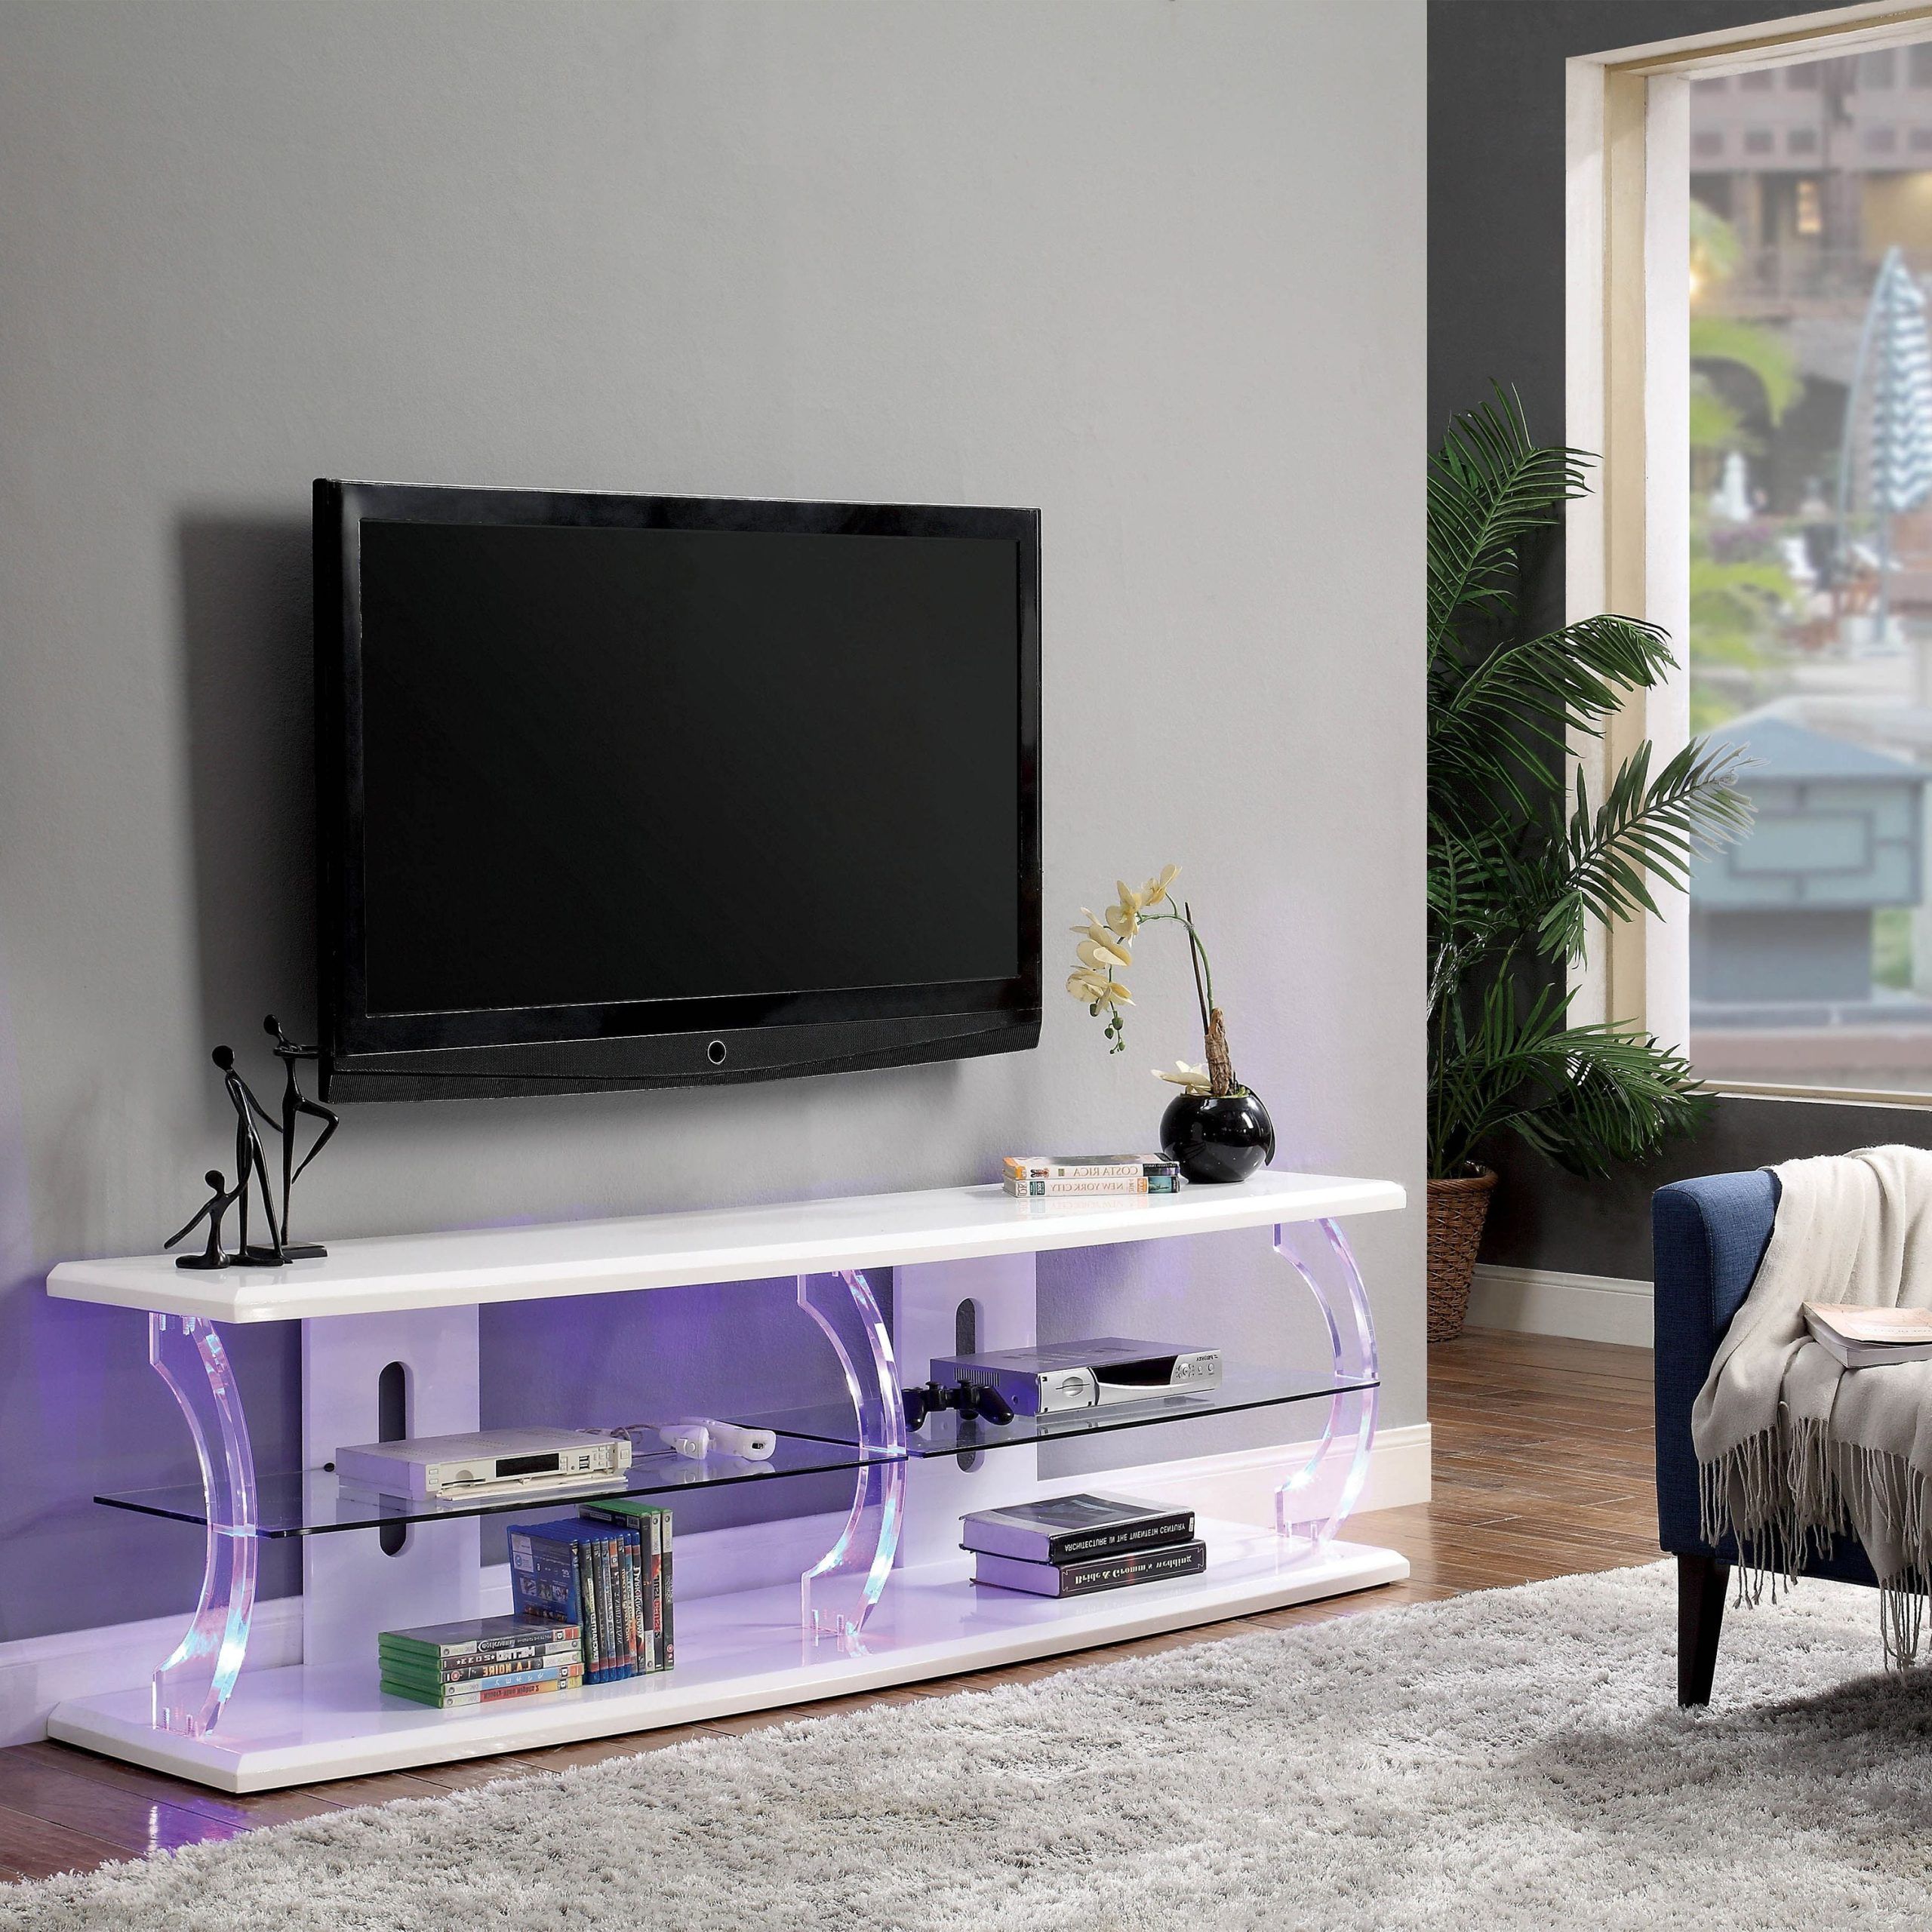 Trendy Tv Stands With Lights Regarding Furniture Of America Vedot Contemporary Led Tv Stand, 72", White And (View 10 of 15)